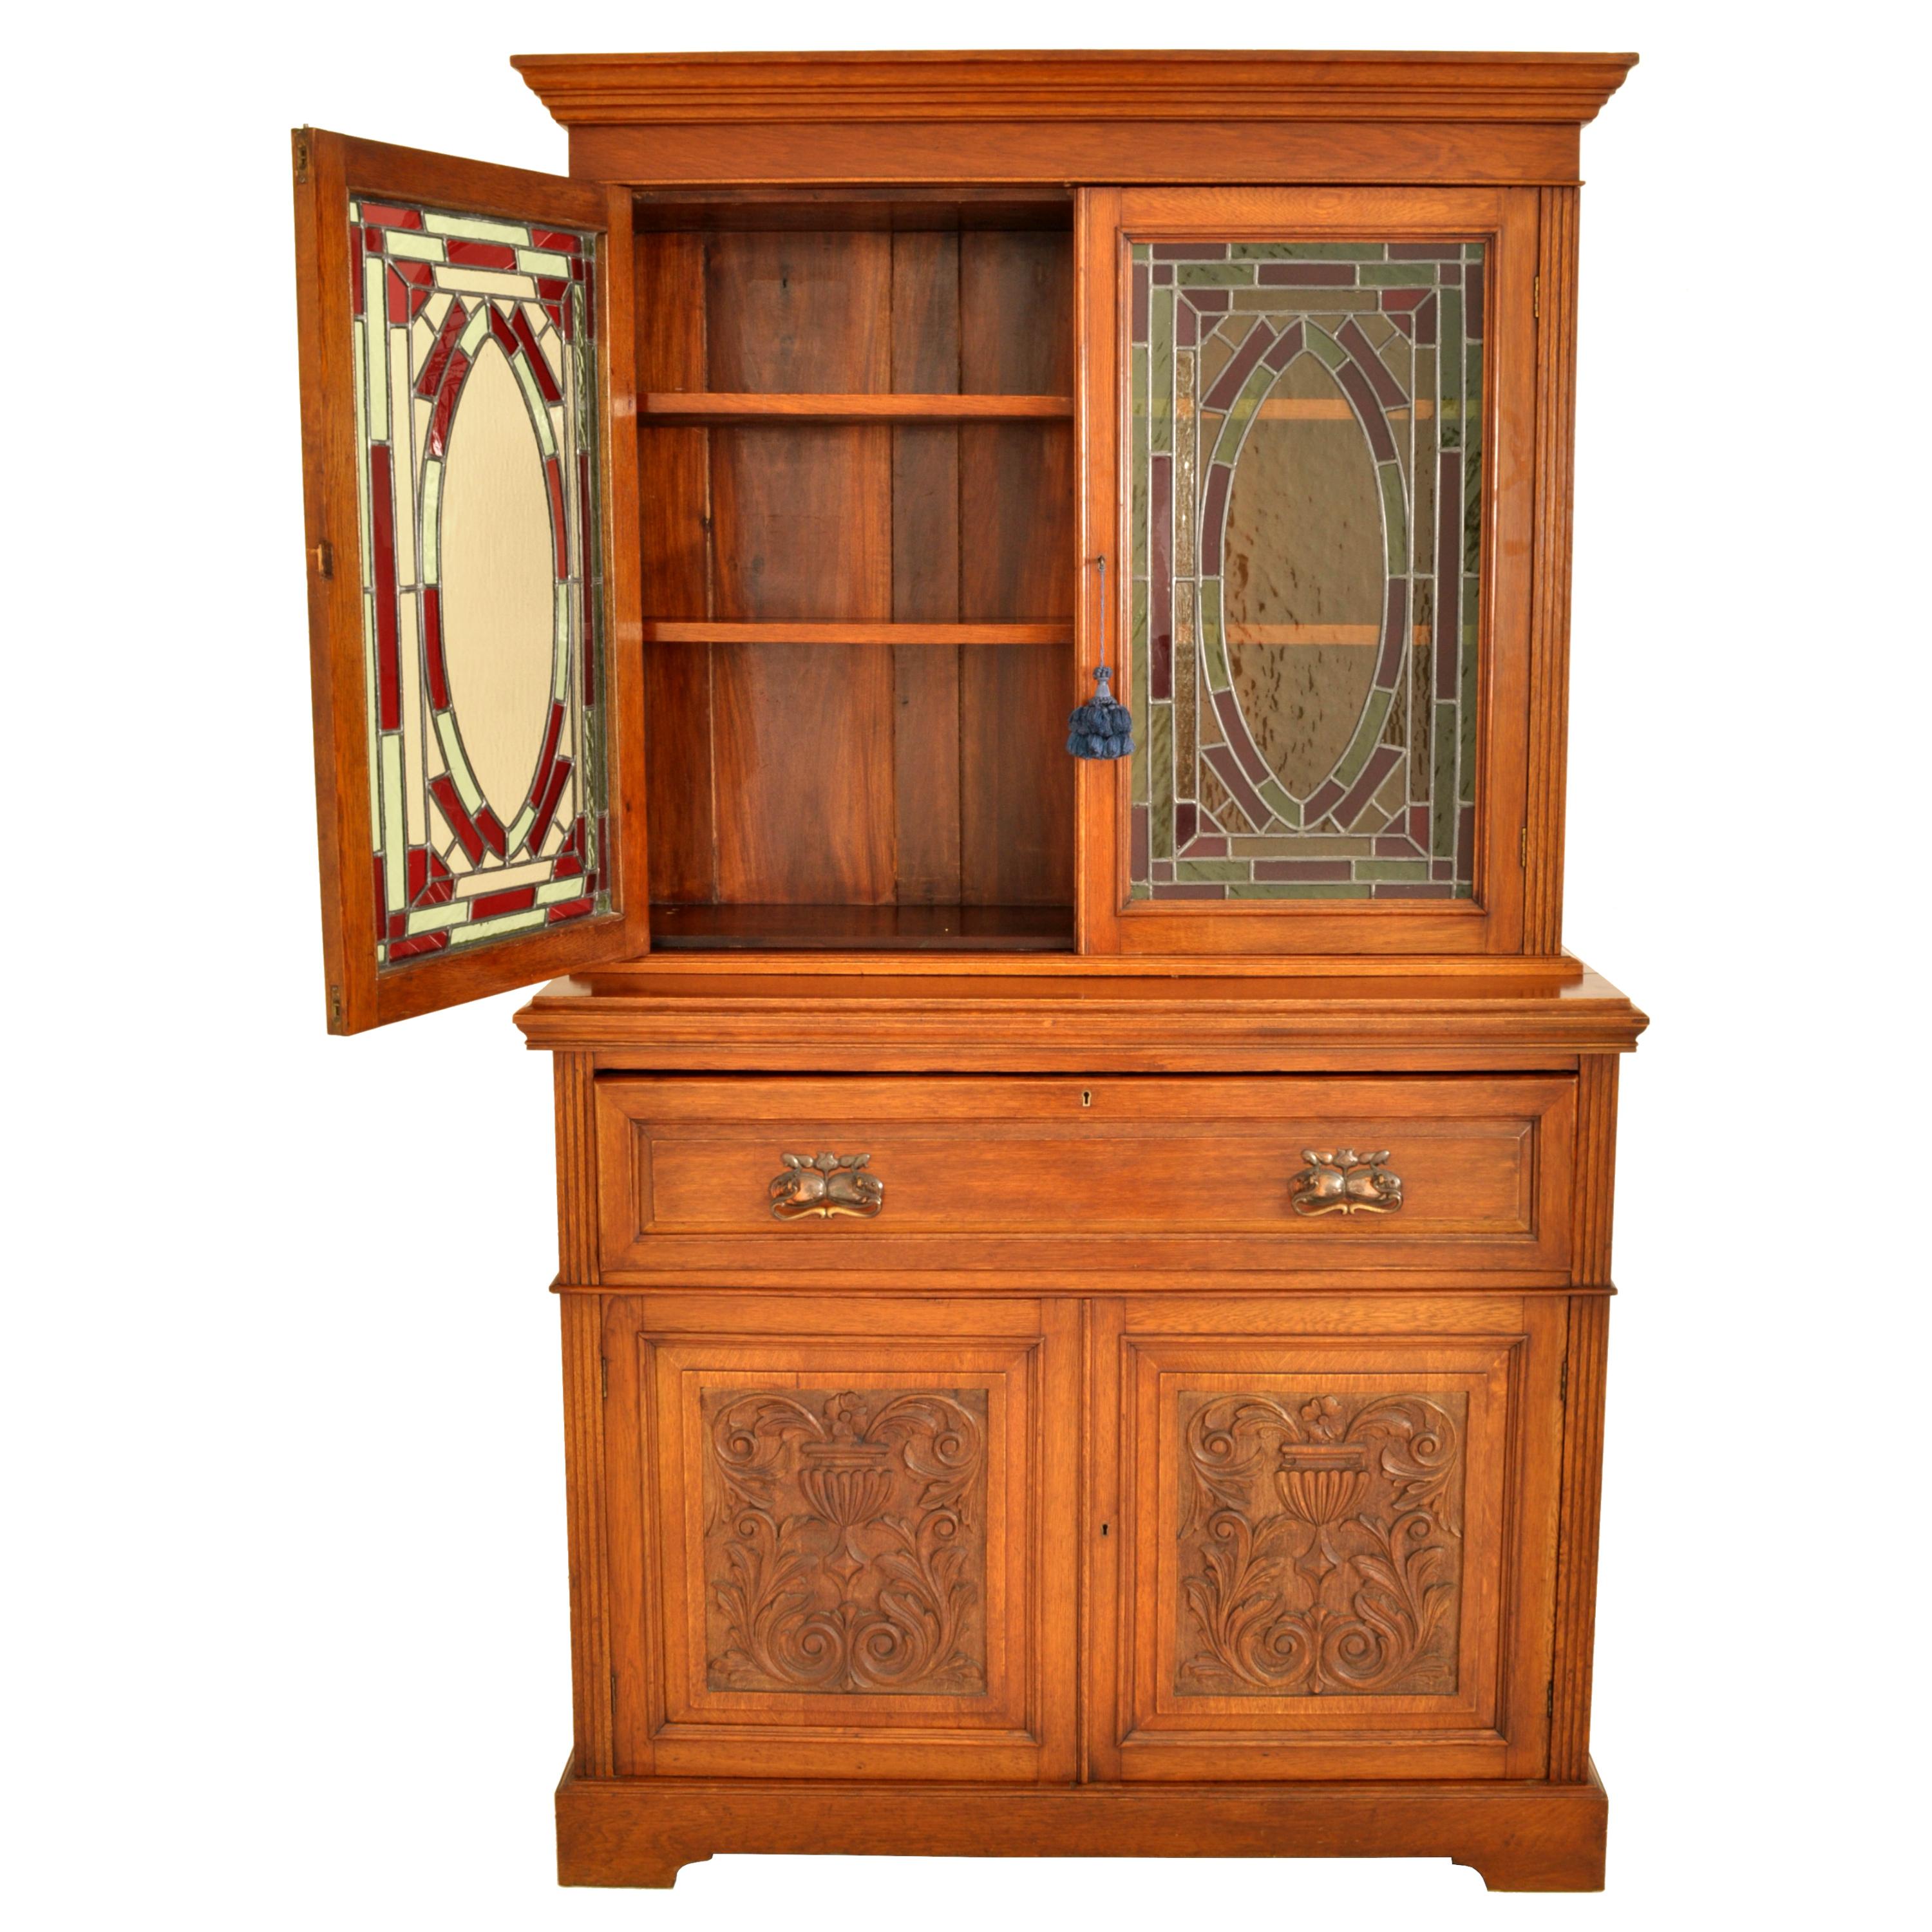 Stained Glass Antique Aesthetic Movement Carved Ash Leaded Glass Secretary Desk Bookcase, 1890